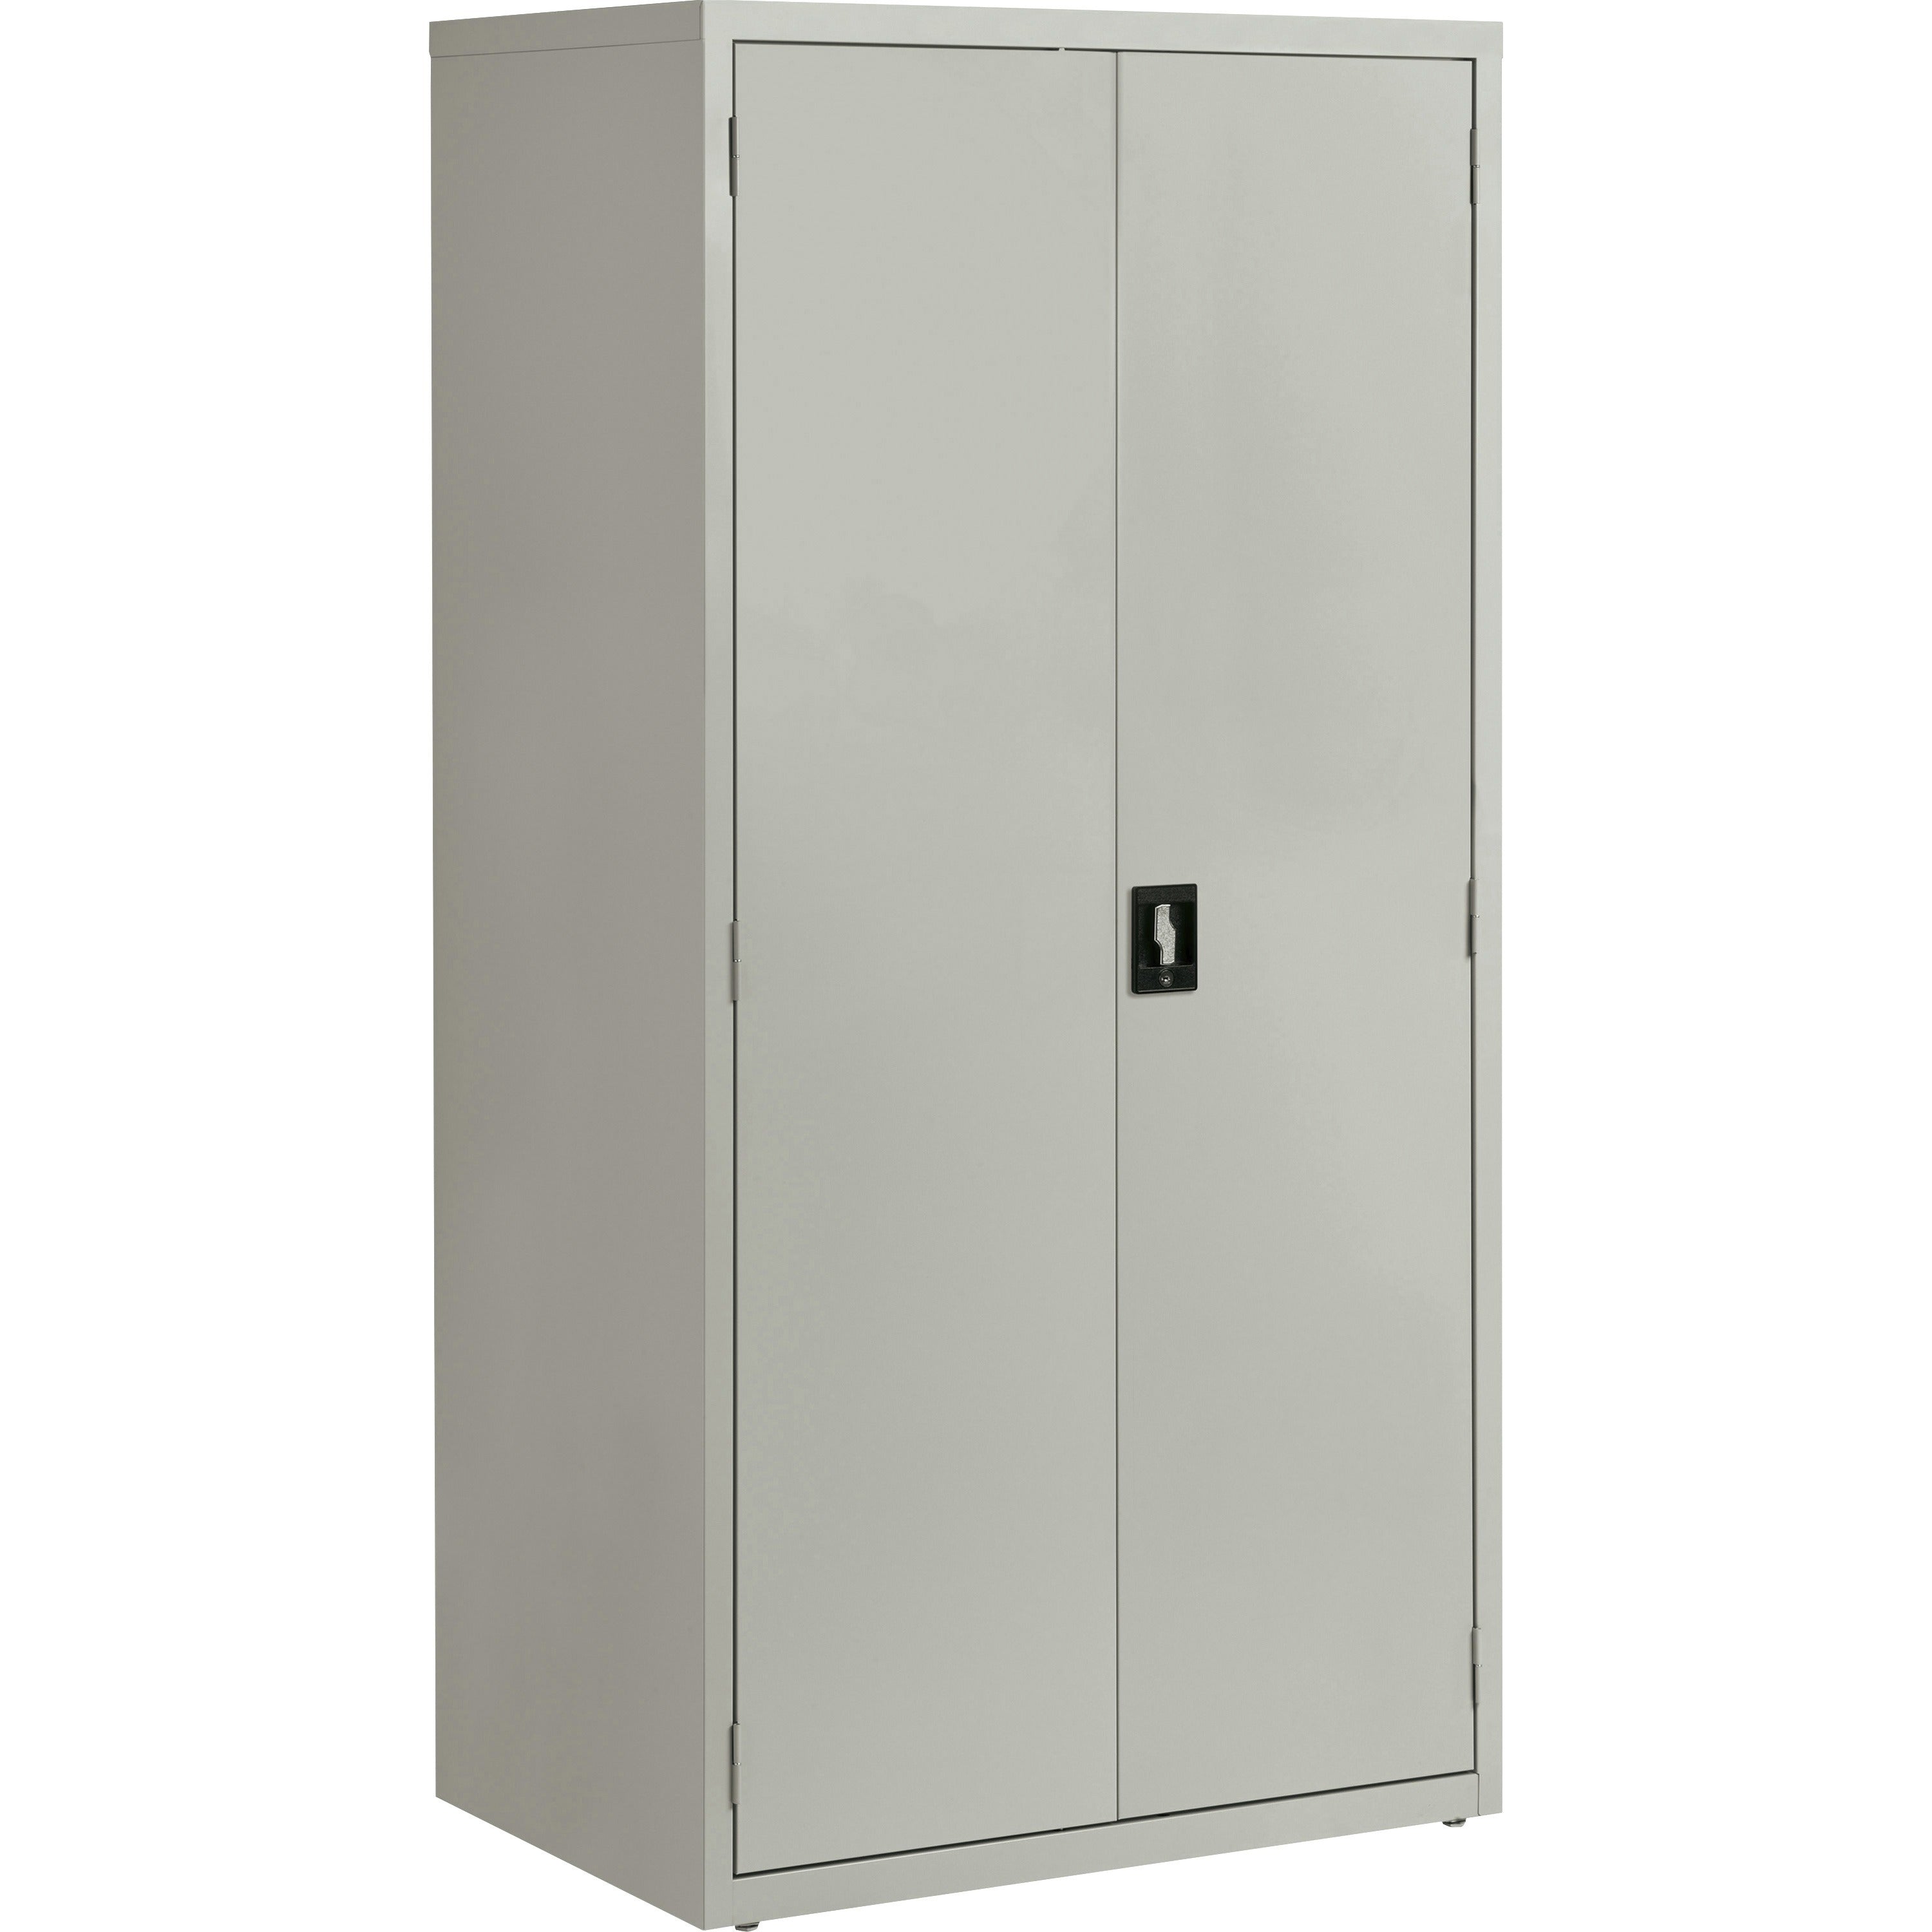 lorell-fortress-series-storage-cabinet-24-x-36-x-72-5-x-shelfves-hinged-doors-sturdy-recessed-locking-handle-removable-lock-durable-storage-space-light-gray-powder-coated-steel-recycled_llr34411 - 1